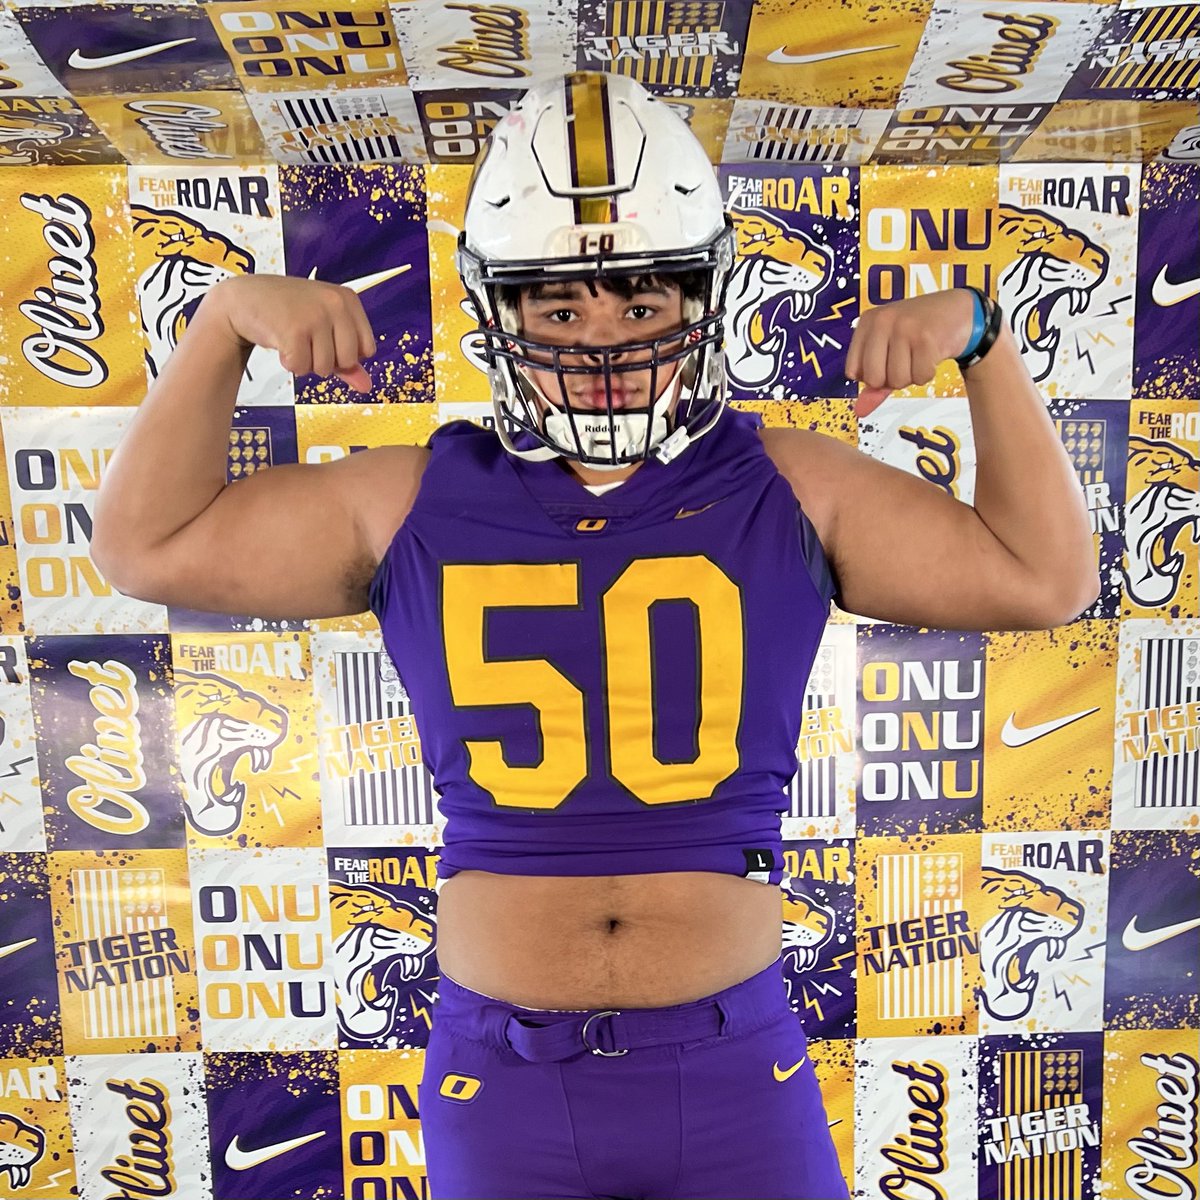 After a great time at Olivet Nazarene University I’m extremely blessed and grateful to say I’ve received an offer!🟡🟣 @ONAZFootball #GoldStandard @coachamitchell1 @CoachGarde @CoachBeckham @T_Wilson11 @RisingStars6 @UDJ_Football @CoachMattLewis